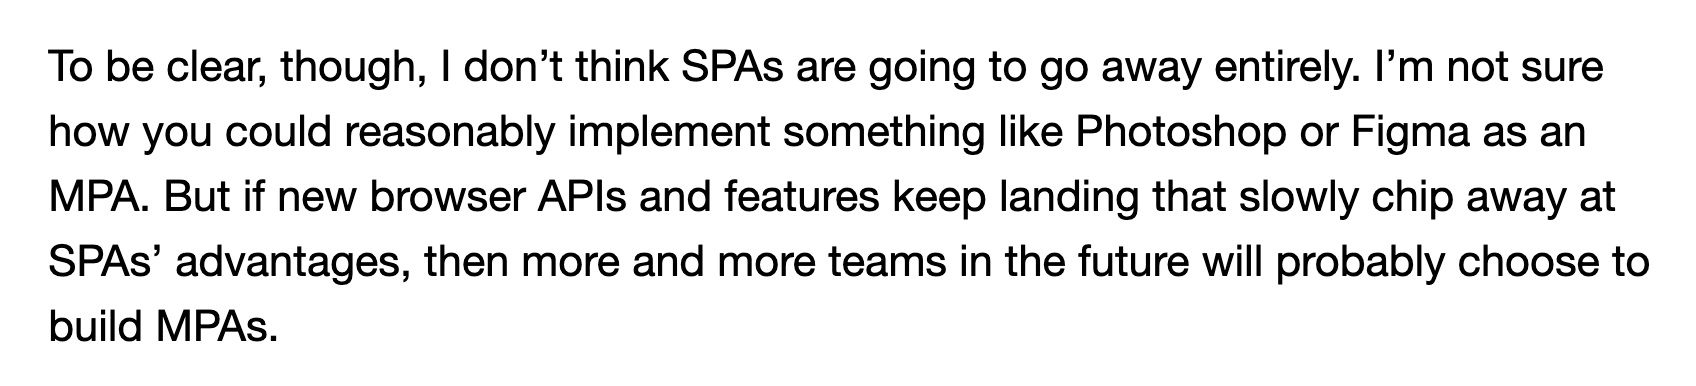 To be clear, though, I don’t think SPAs are going to go away entirely. I’m not sure how you could reasonably implement something like Photoshop or Figma as an MPA. But if new browser APIs and features keep landing that slowly chip away at SPAs’ advantages, then more and more teams in the future will probably choose to build MPAs.